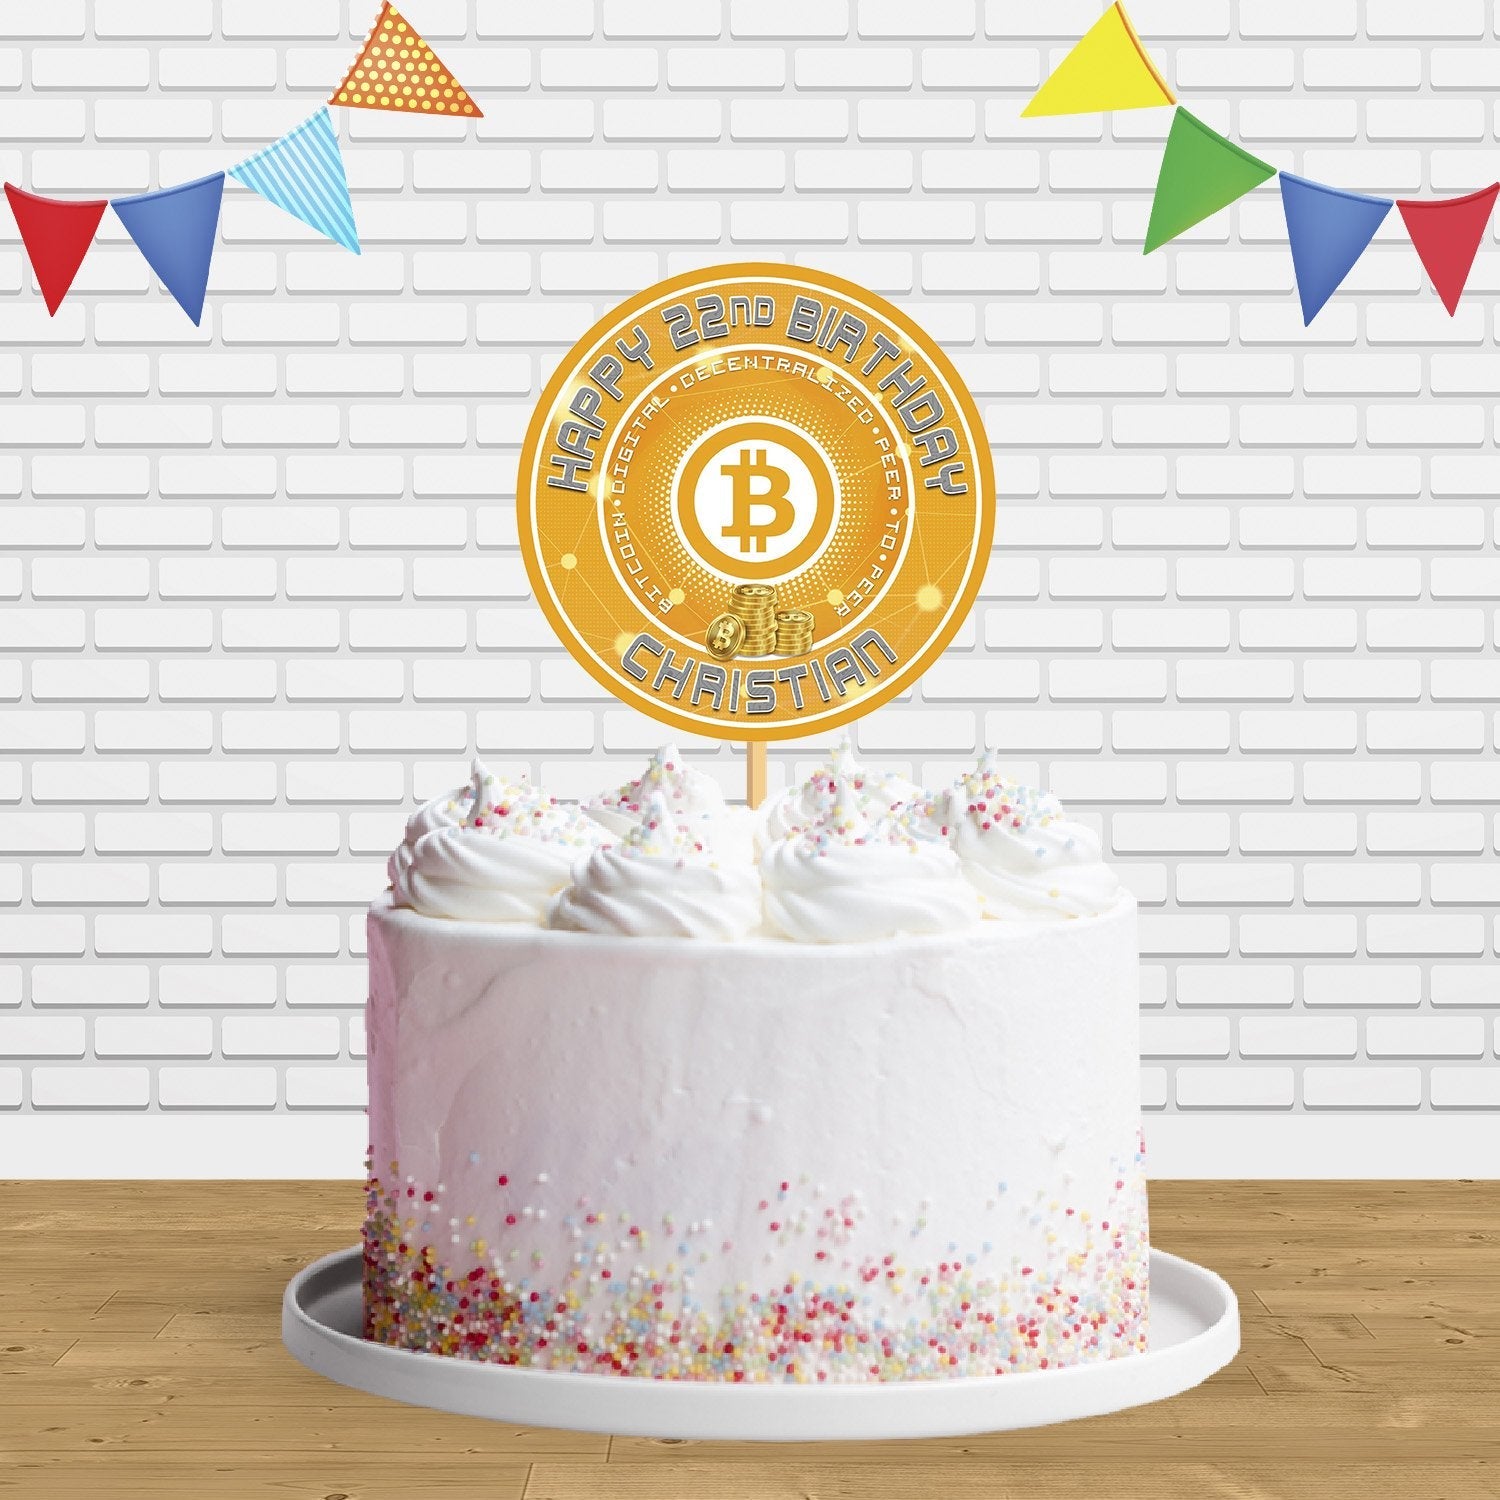 Check out the birthday cake. I'm bullish today, tomorrow, and forever. :  r/Bitcoin